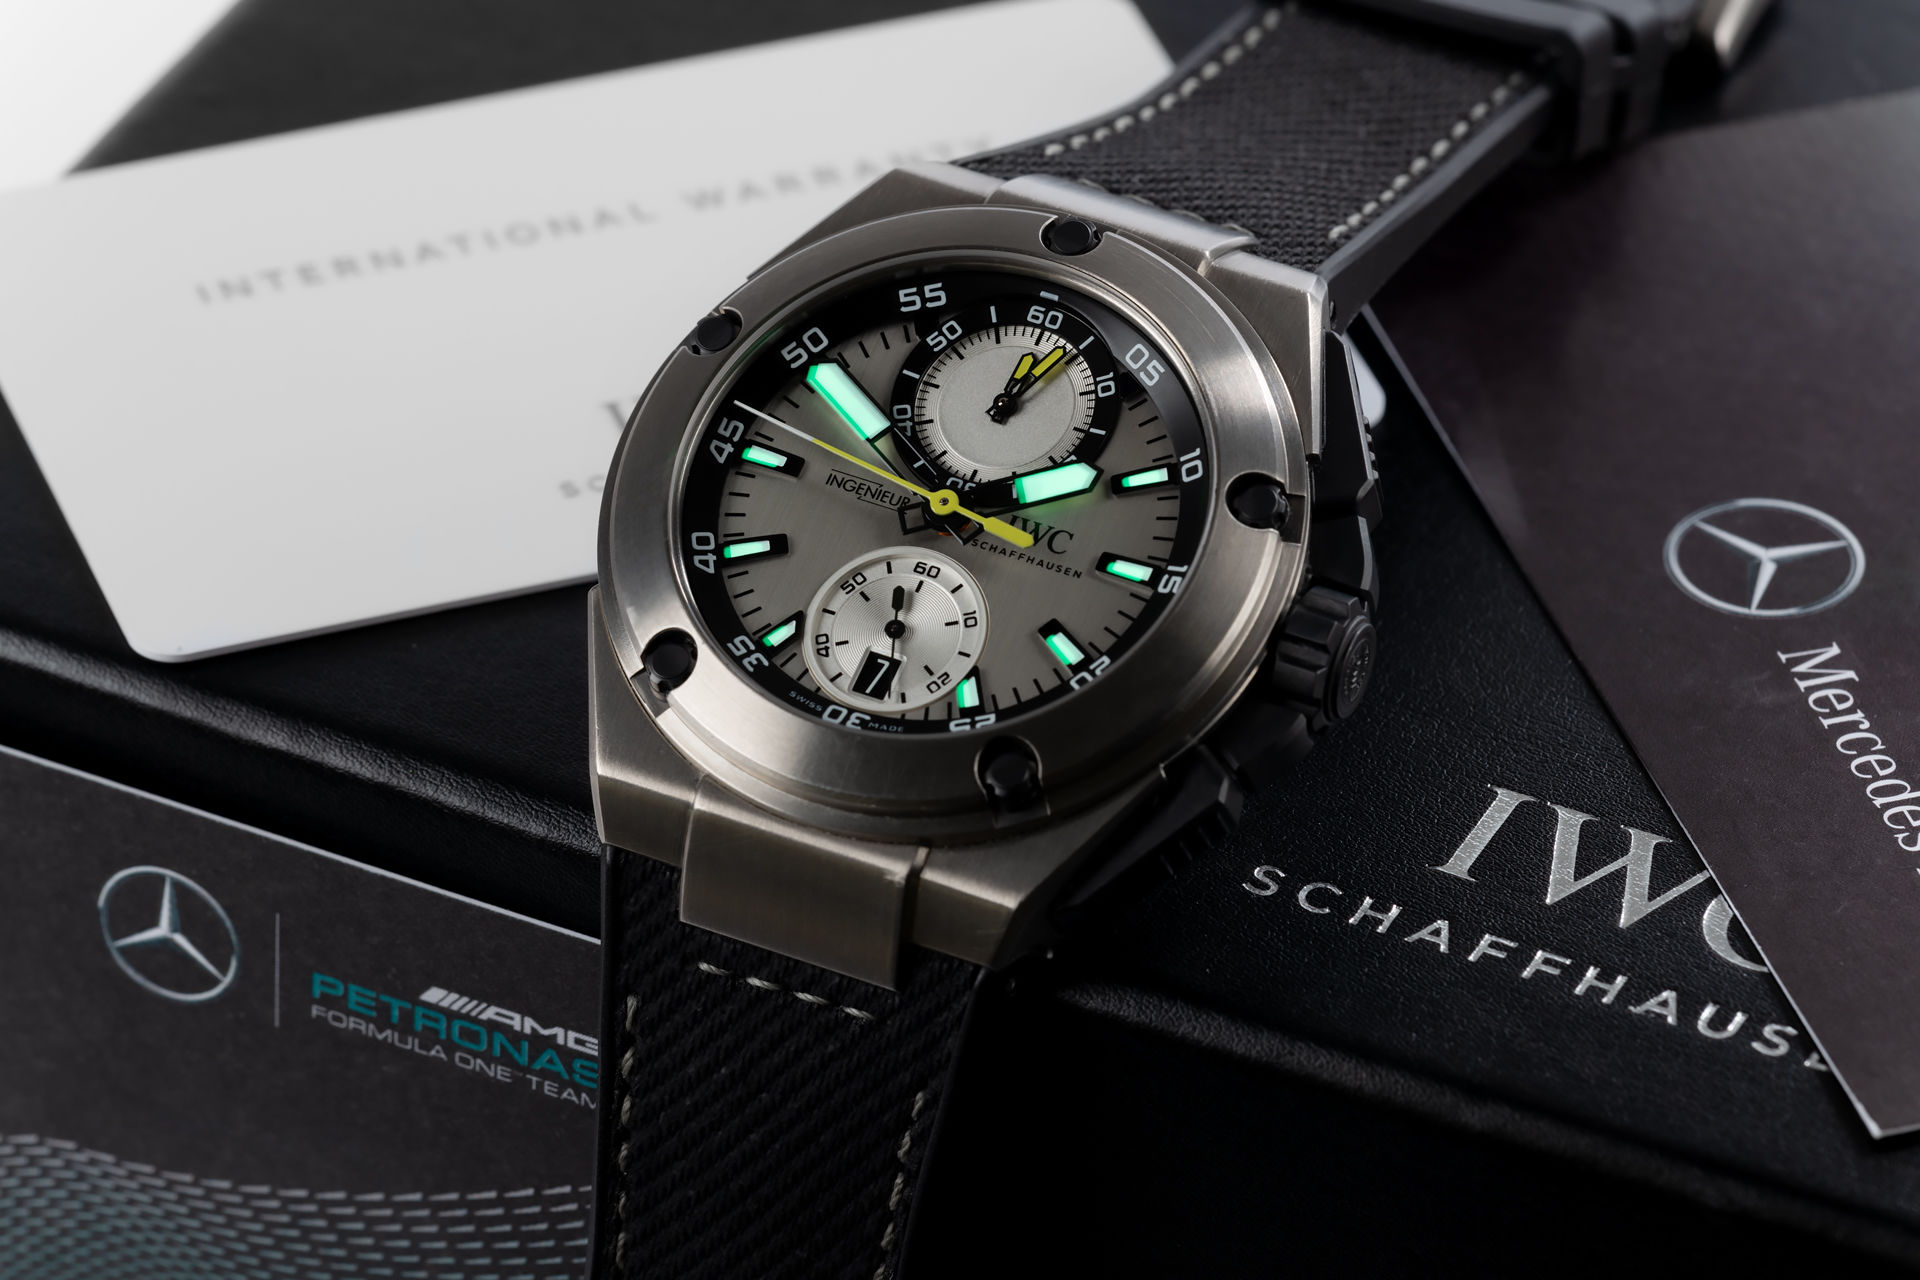 ref IW379603 | One of 250 'Limited Edition' | IWC Ingenieur